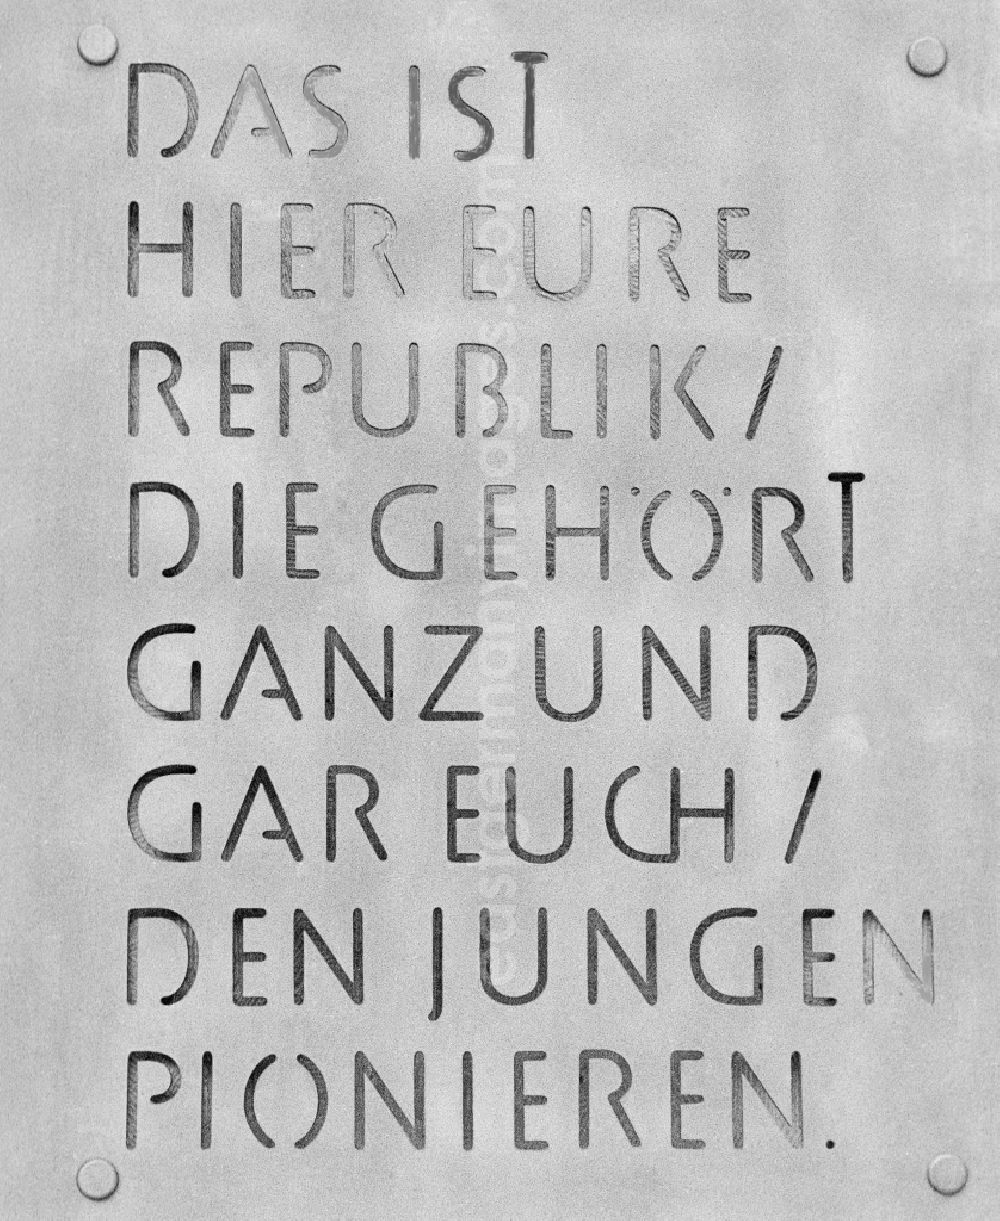 GDR image archive: Joachimsthal - Quotation of Wilhelm Pieck, in a Matall board stamped, on the occasion of the opening of the pioneer's republic Wilhelm Pieck in the Werbellin lake in Joachimsthal in the federal state Brandenburg in the area of the former GDR, German democratic republic